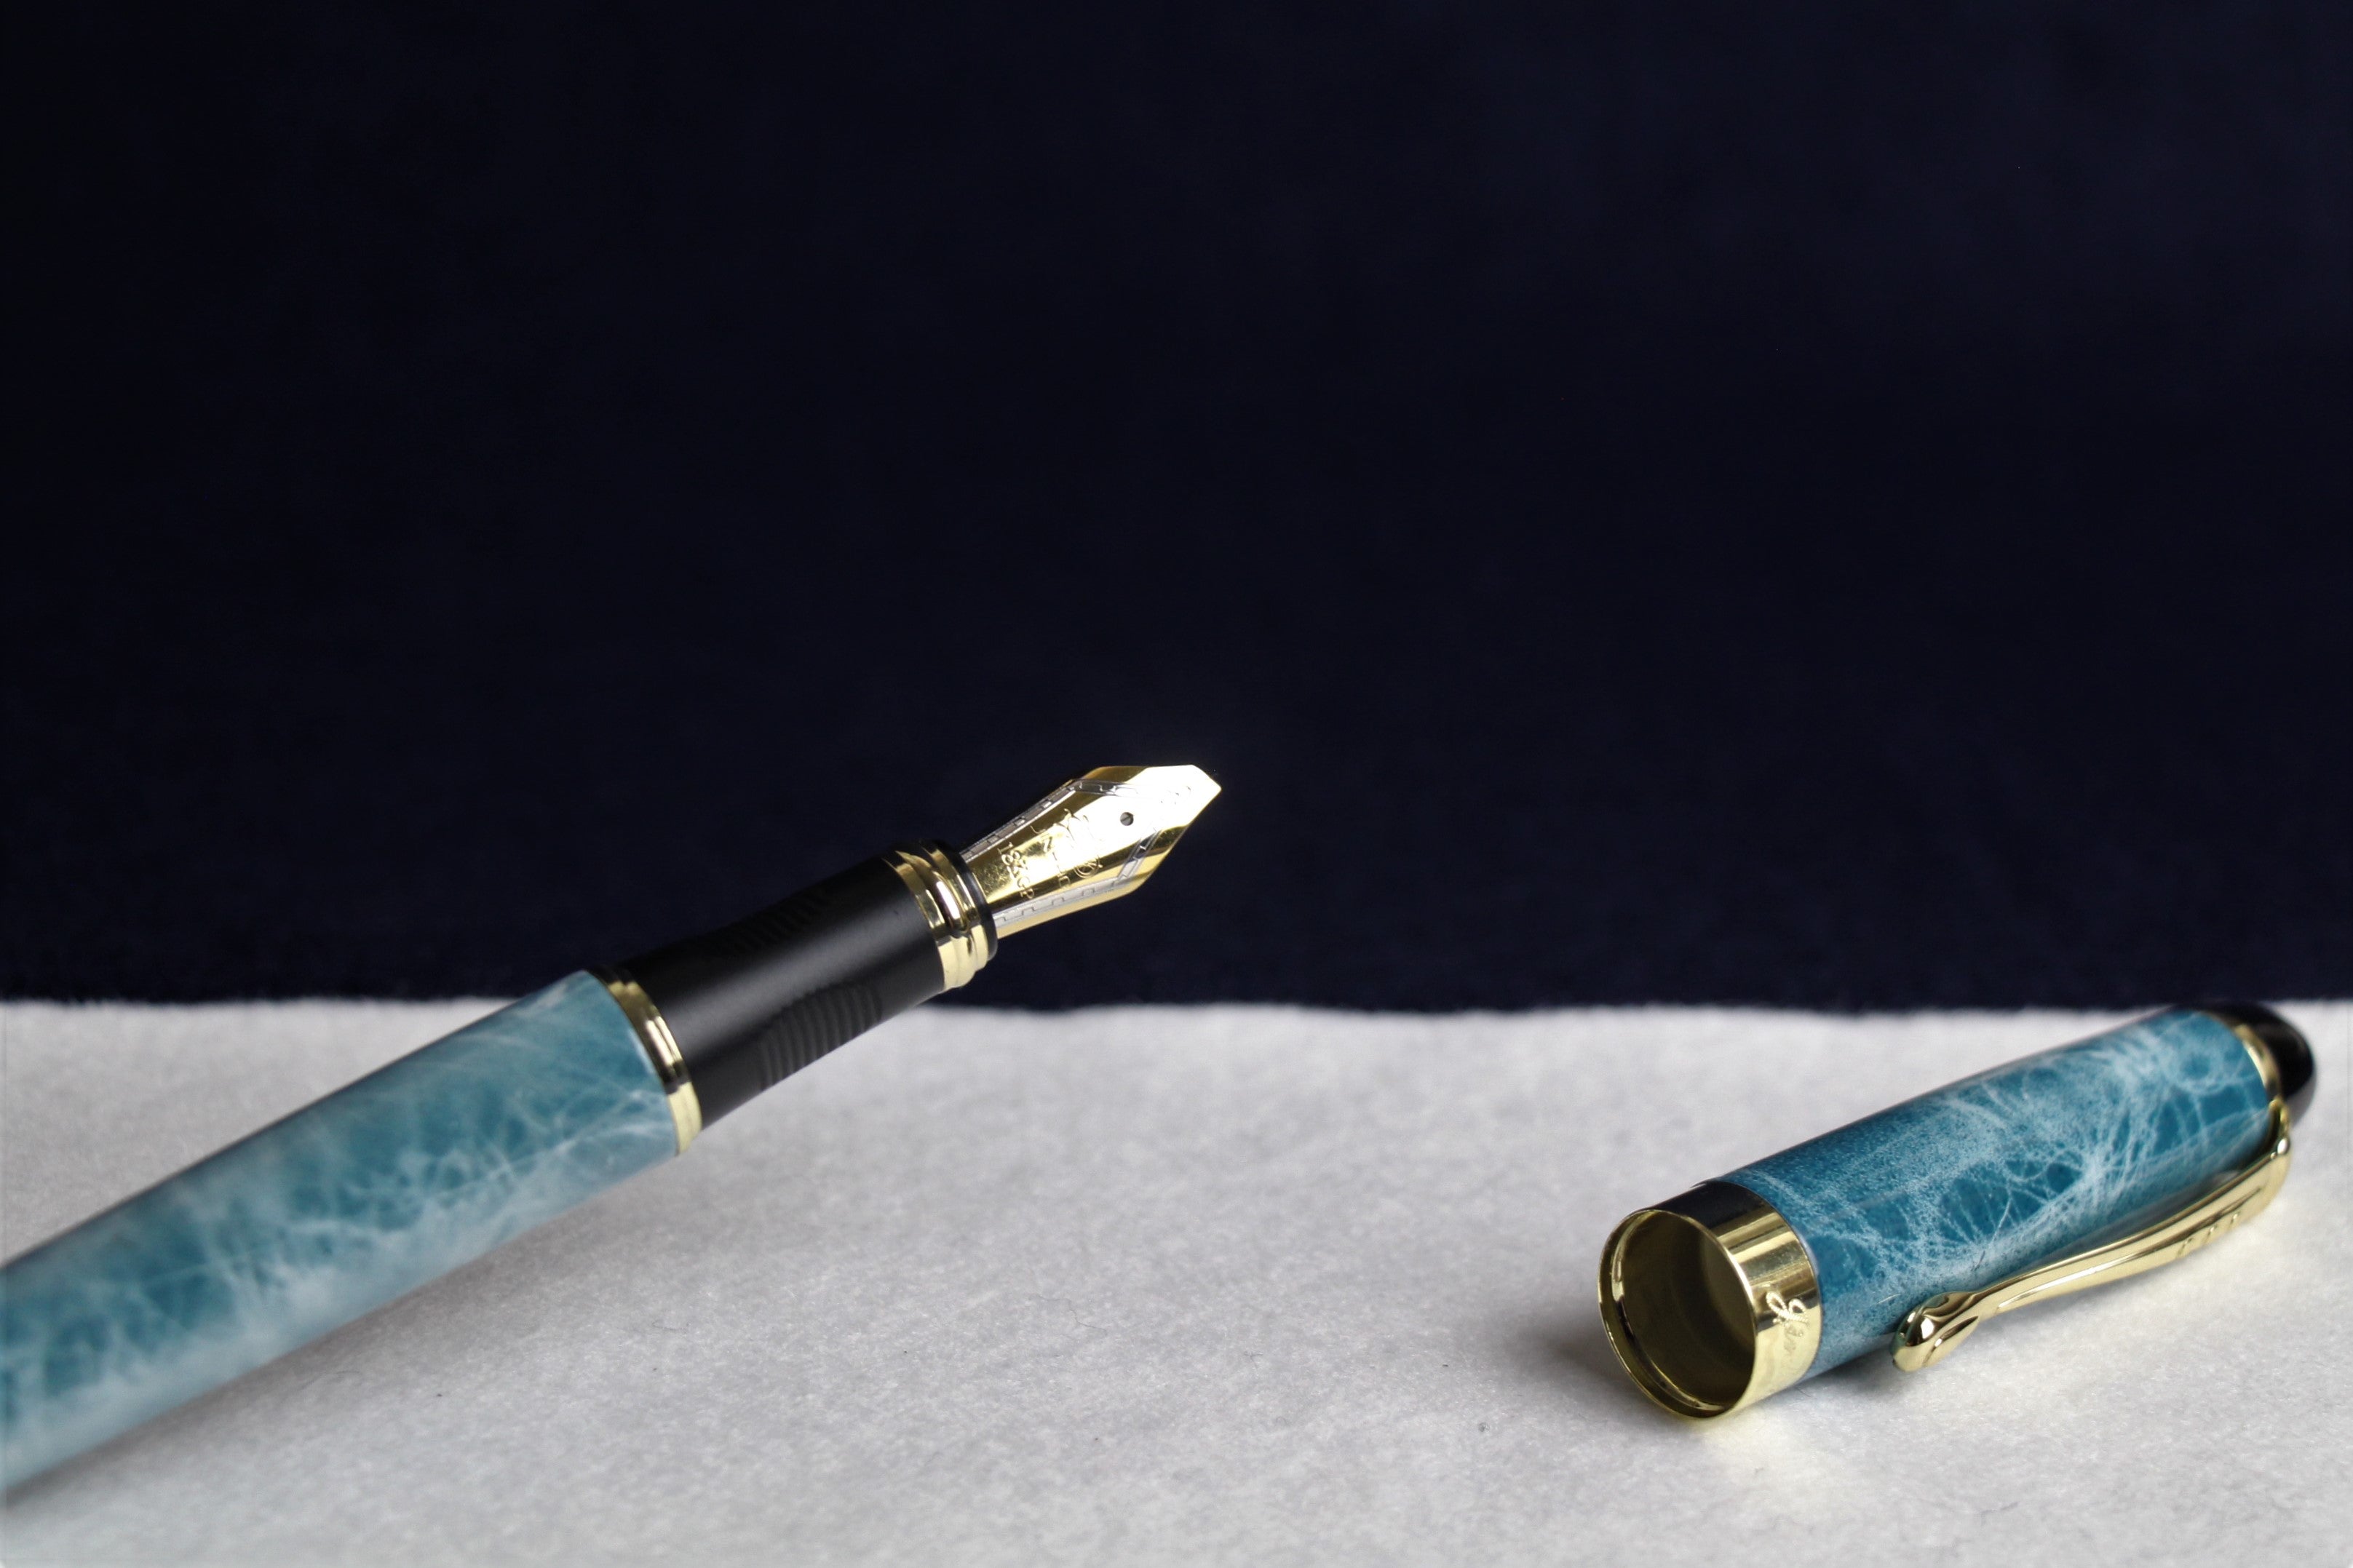 Jinhao X450 fountain pen with left oblique nib for Arabic calligraphy